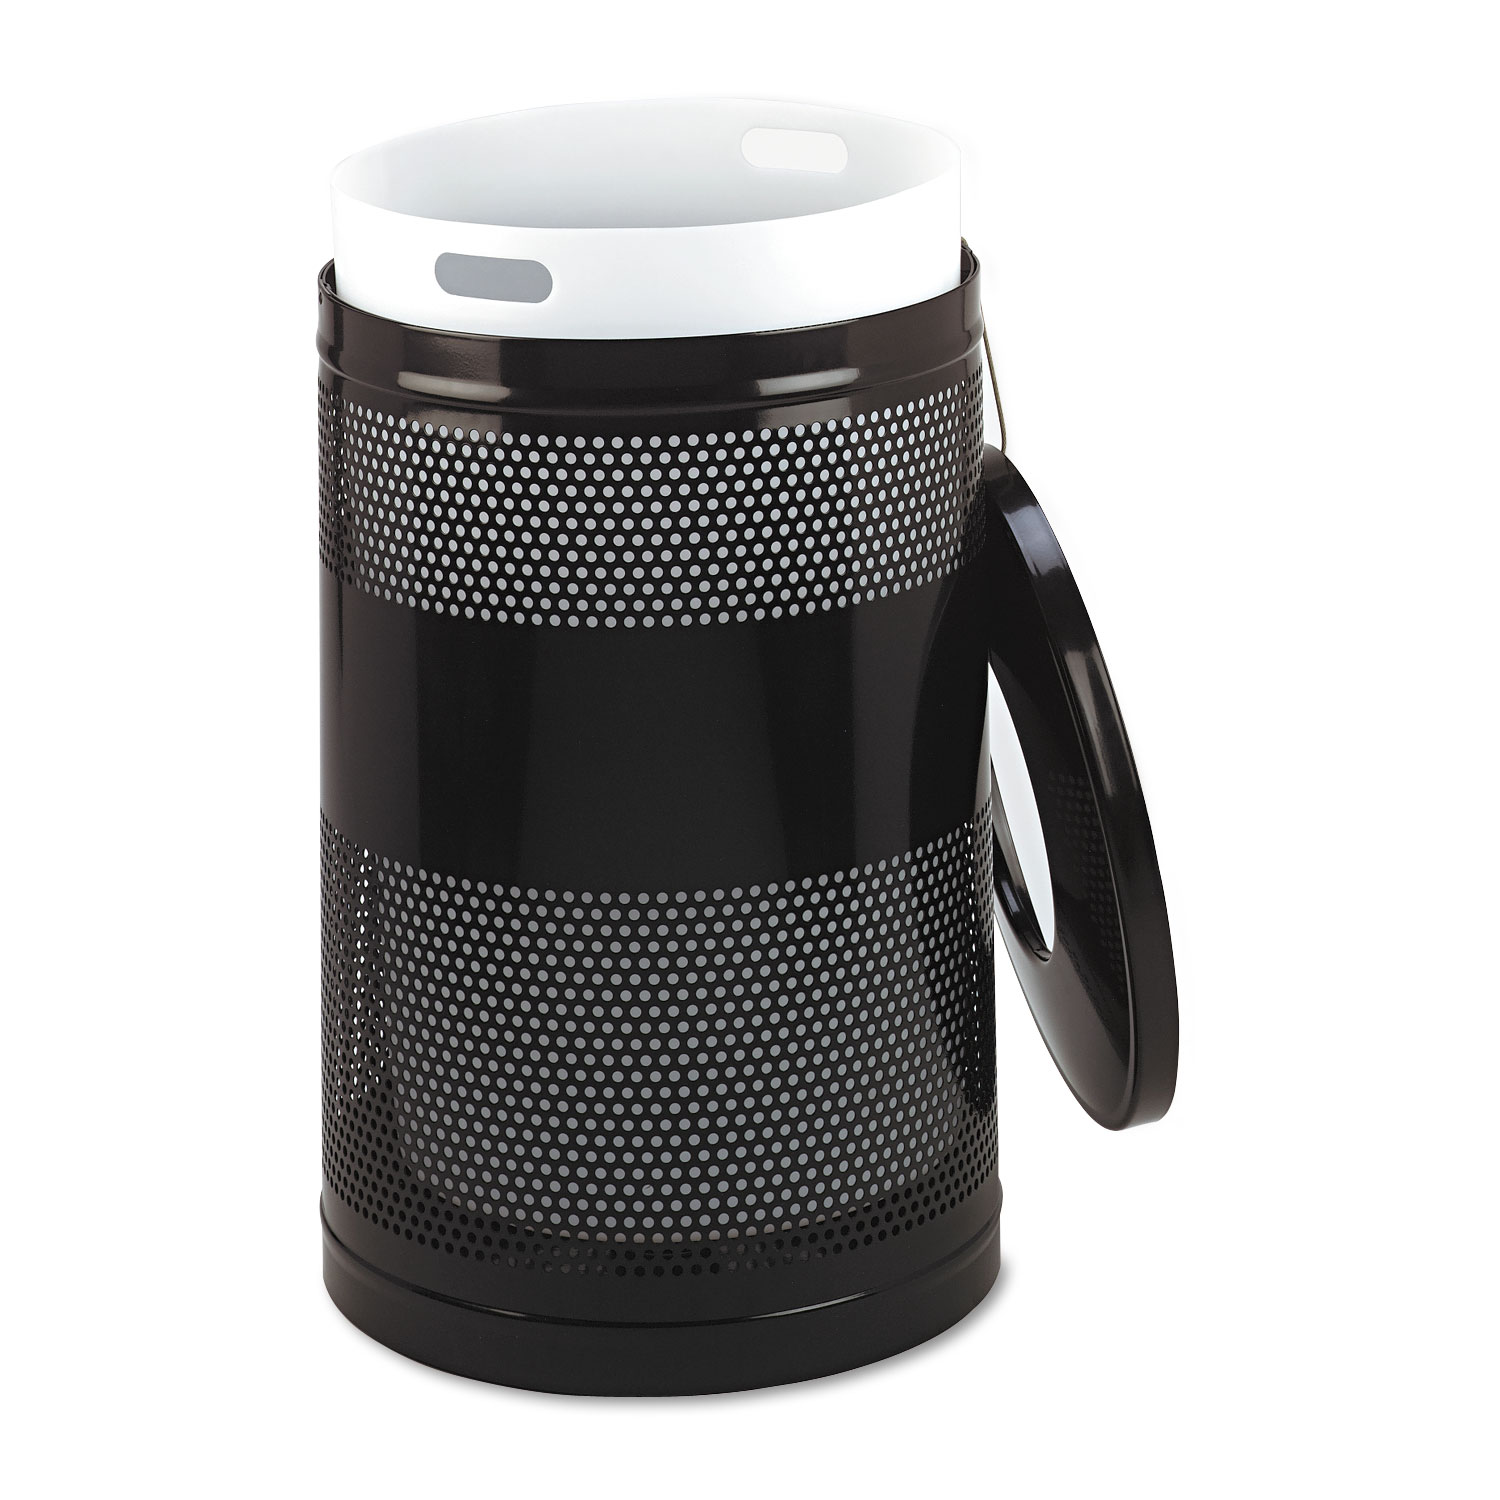 Classics Perforated Open Top Receptacle, Round, Steel, 51gal, Black